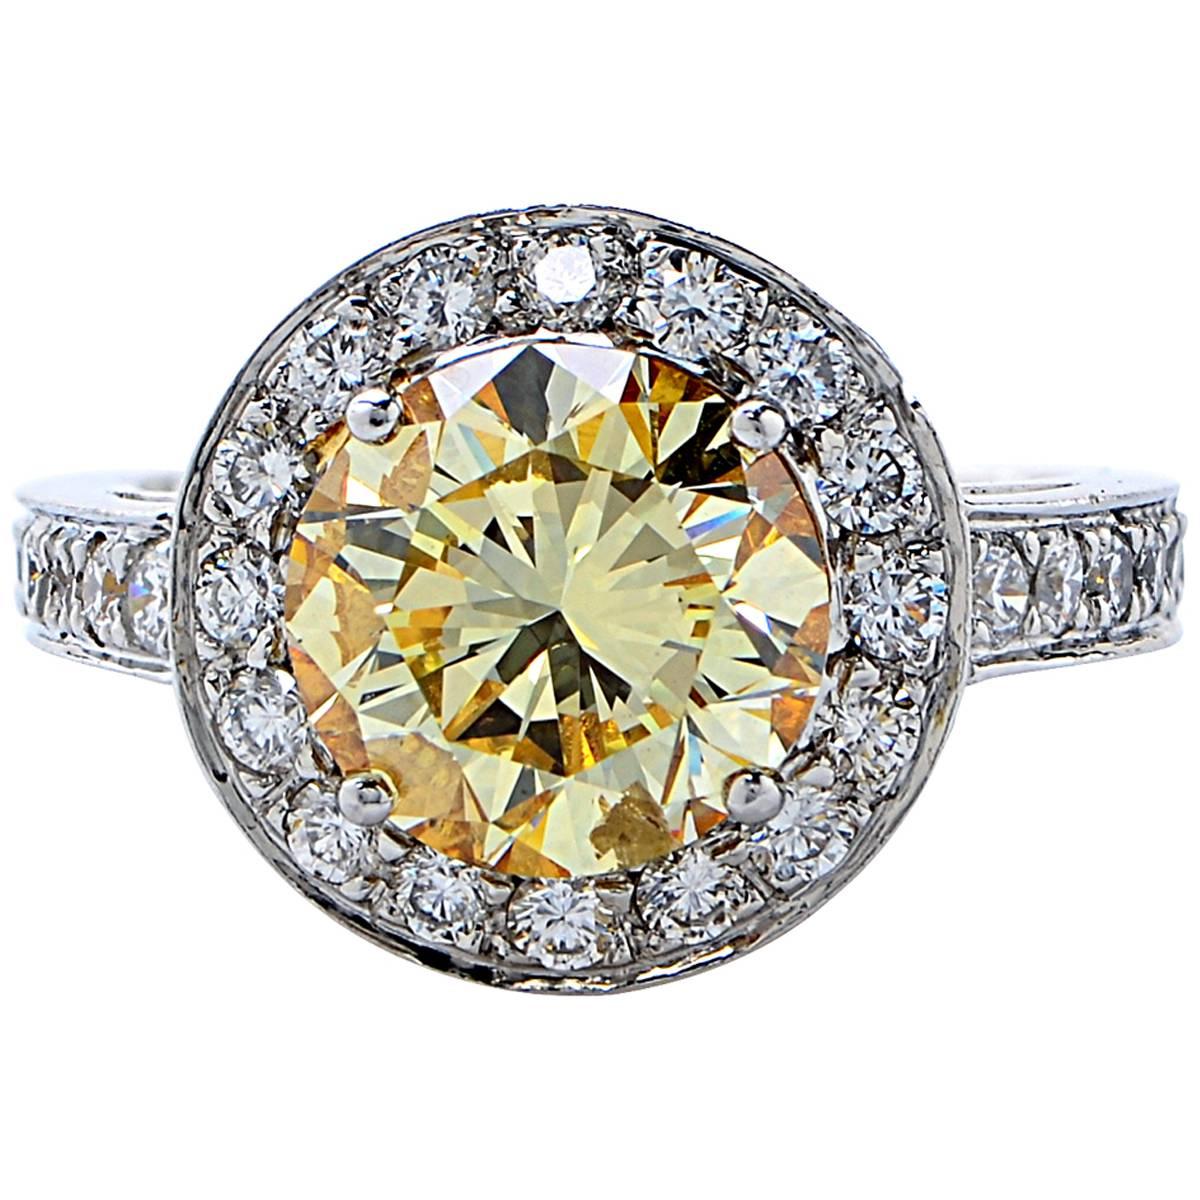 Beautiful handmade platinum engagement ring featuring a GIA graded 3.36ct fancy yellow round brilliant cut diamond accented by 52 round brilliant cut diamonds weighing approximately 1ct.

The ring is a size 6 and can be sized up or down.
It is